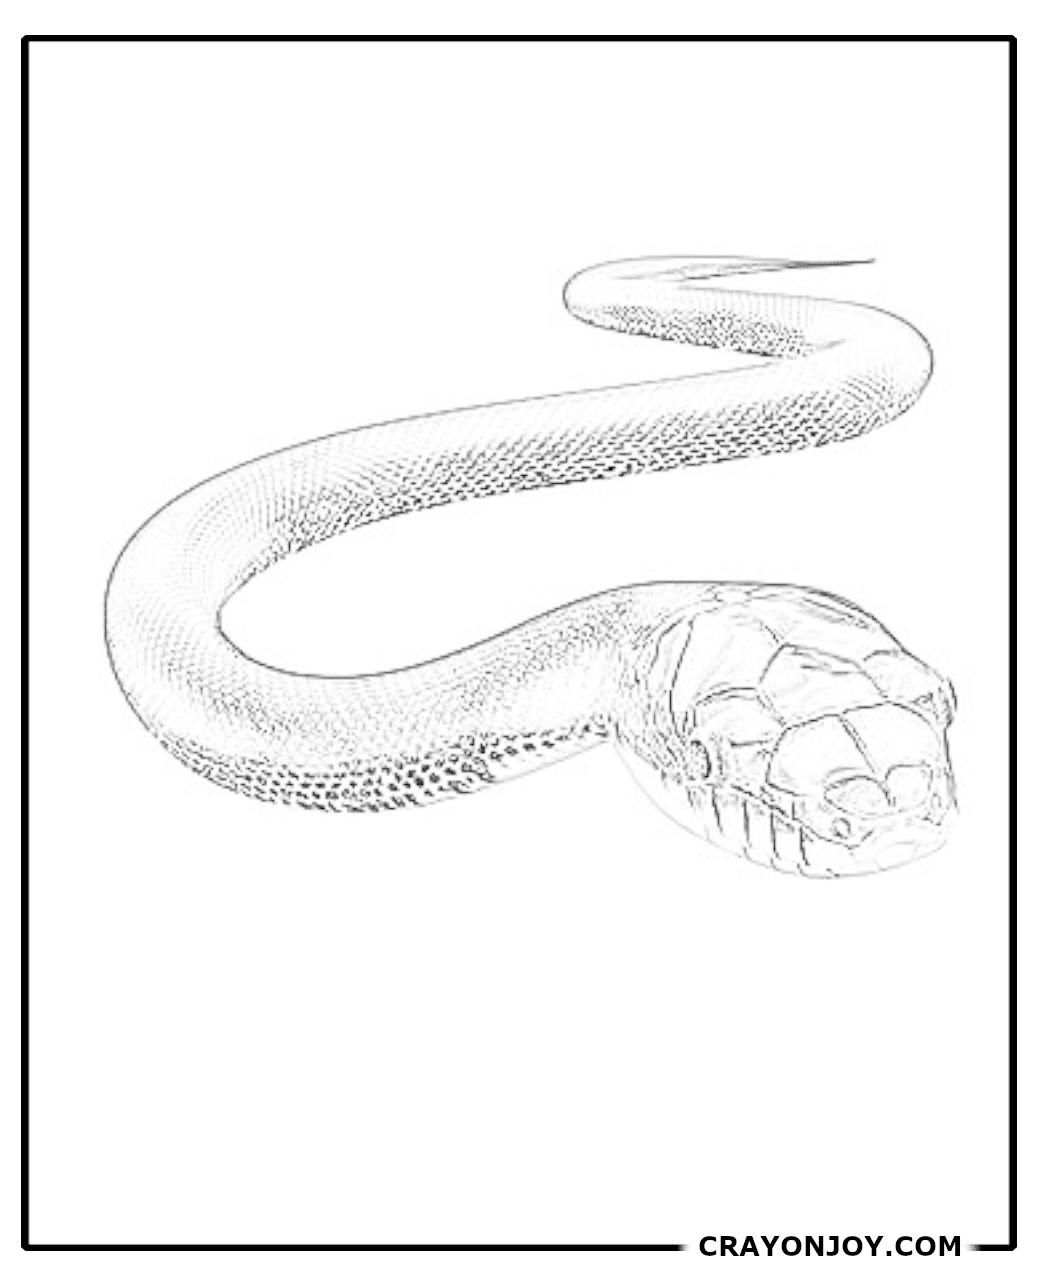 Rat Snake Coloring Pages: Free Printable Sheets for Kids and Adults